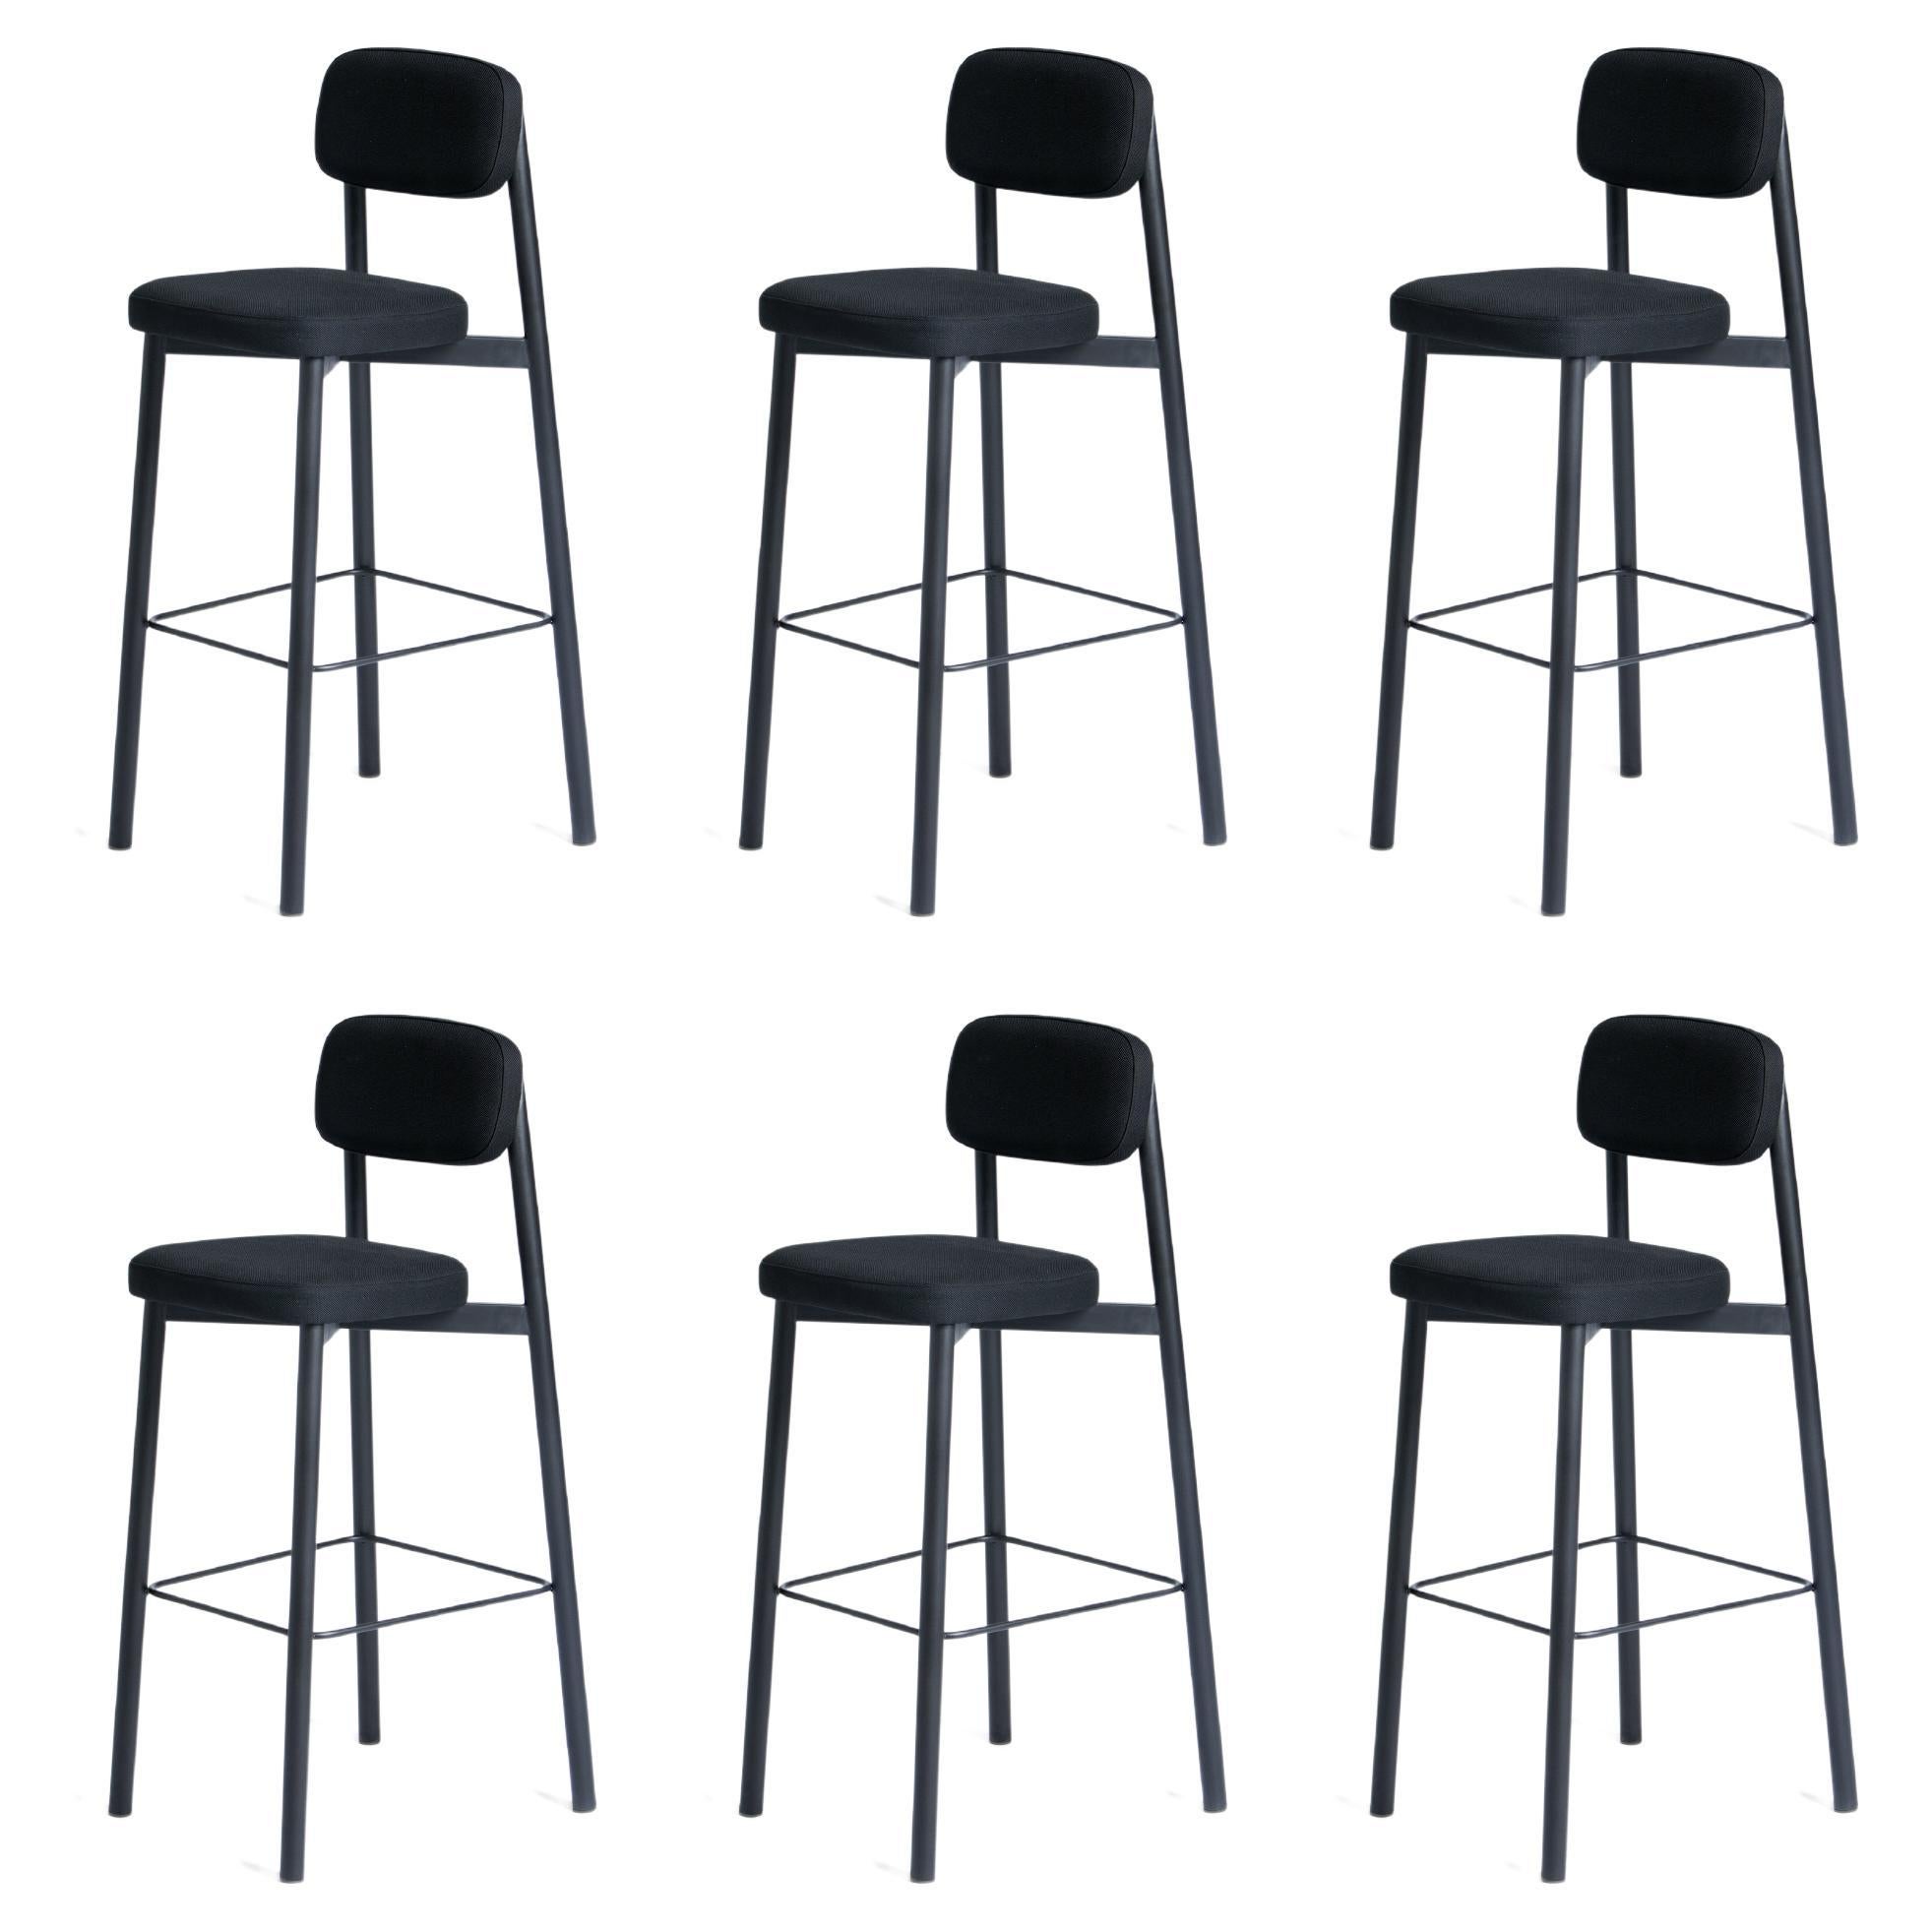 Set of 6 Black Residence 75 Counter Chairs by Kann Design